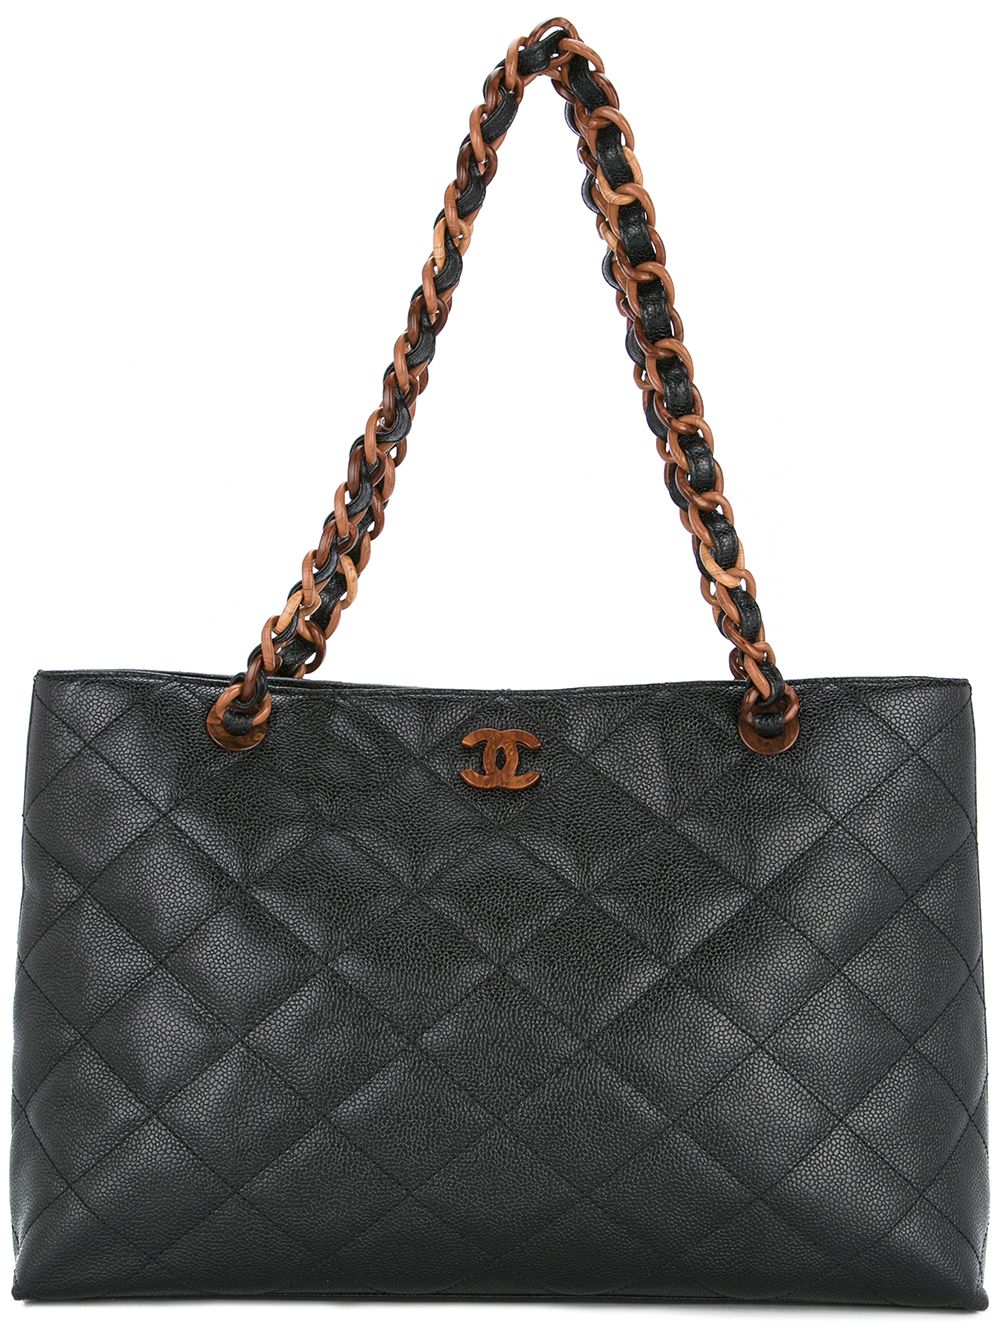 2002 CHANEL 72 Series Large Cream Black Quilted Fabric Classic Tote  Shoulder Bag